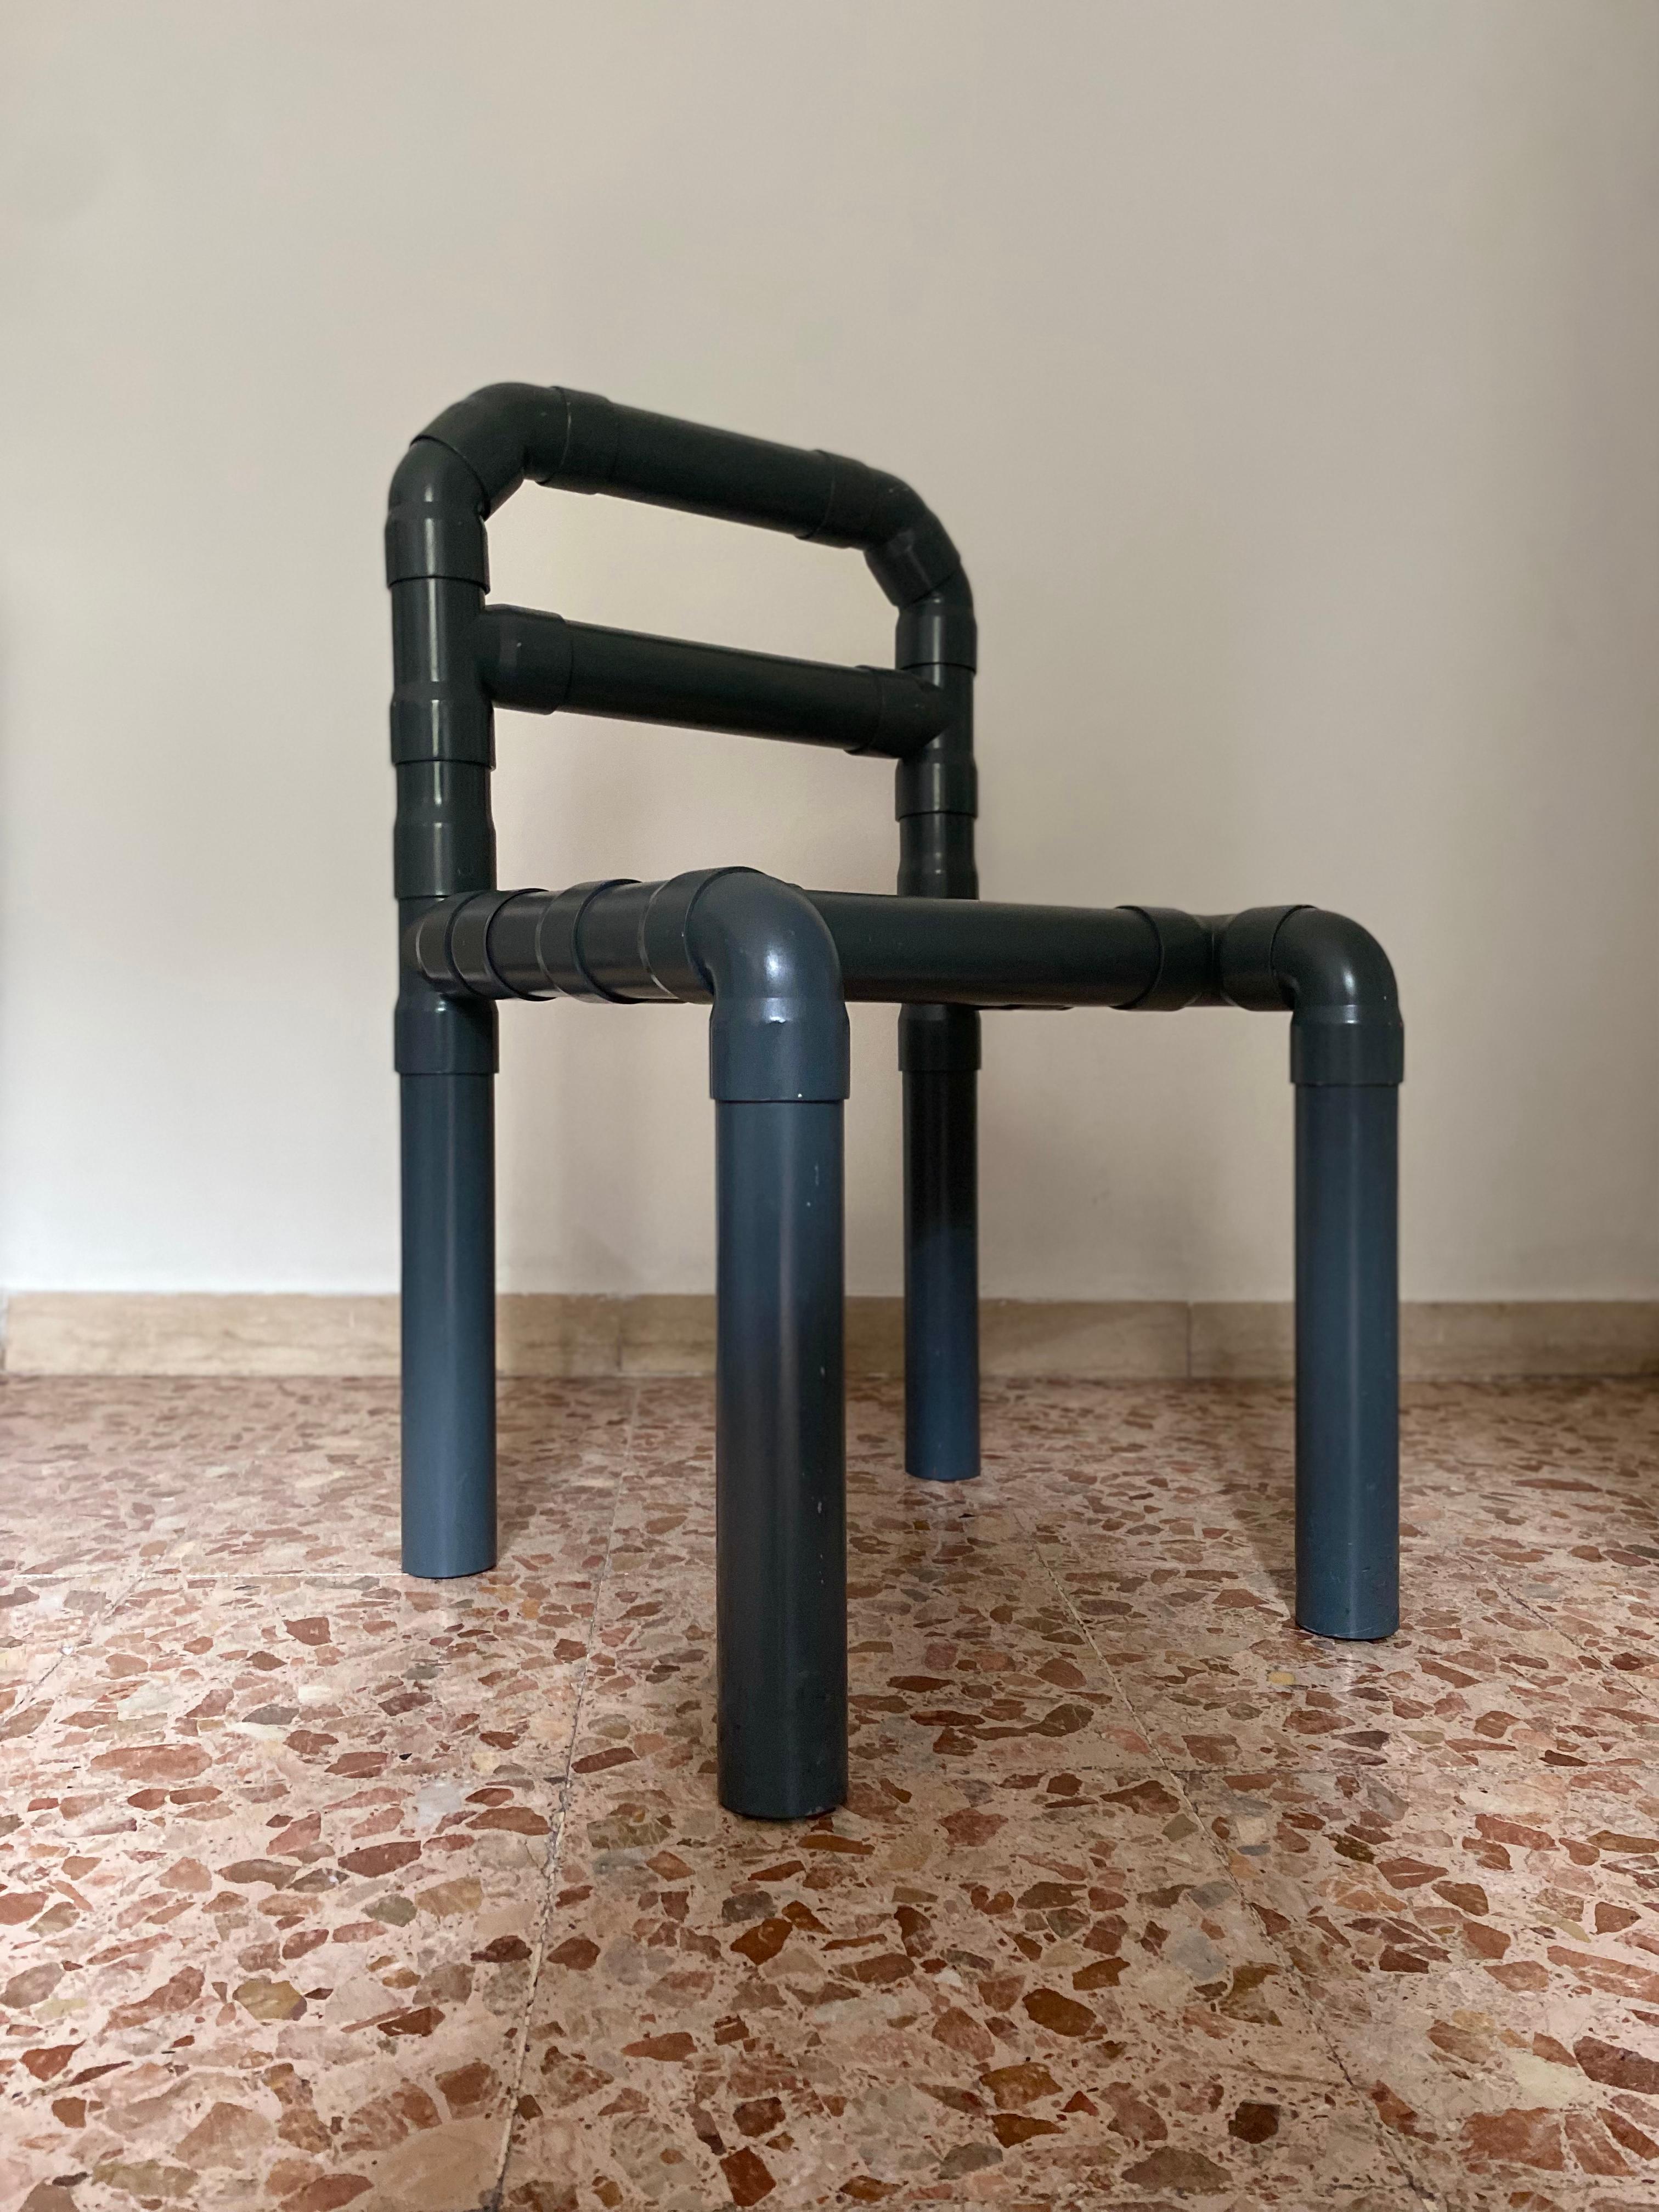 Niccoló Spirito
Chair Mod. Diabo
PVC pipes ? 63

Each piece is accompanied by a Certificate of Authenticity signed by the author.

DIABO chair has no screws. Pipes are assembled by a special technique from their inside.
The curve's sloping of